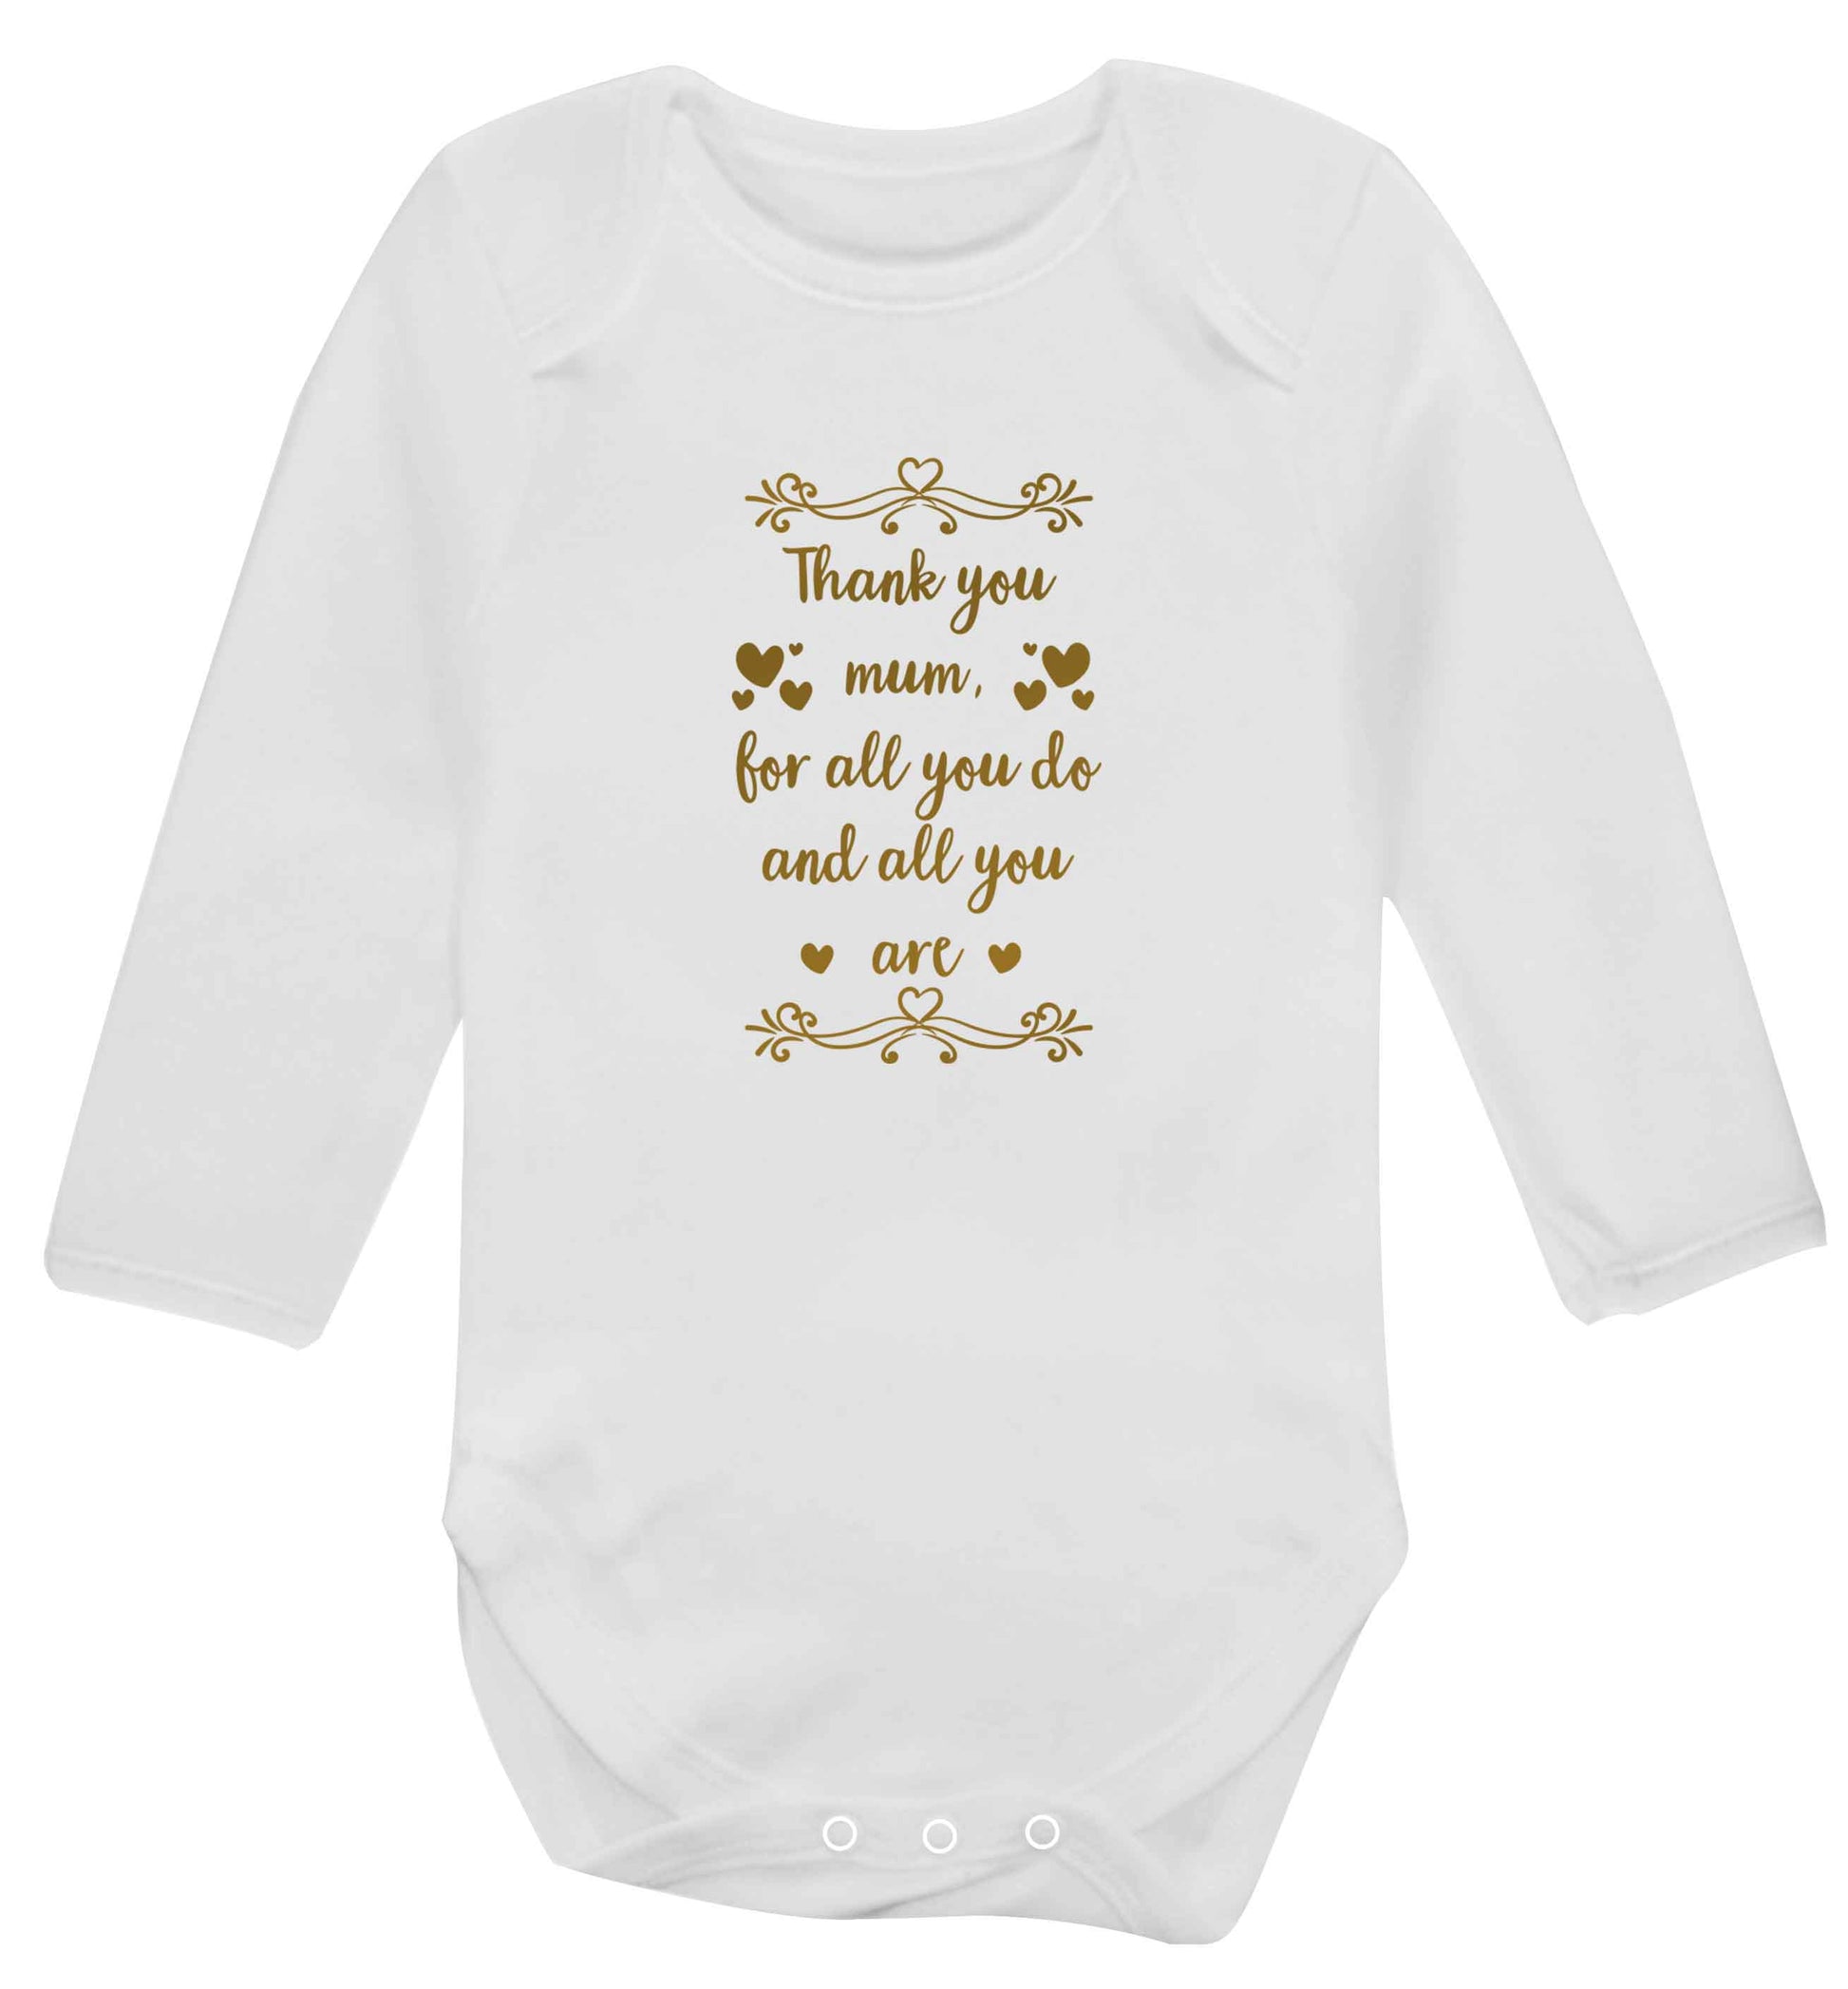 Gorgeous gifts for mums on mother's day! Thank you mum for all you do and all you are baby vest long sleeved white 6-12 months